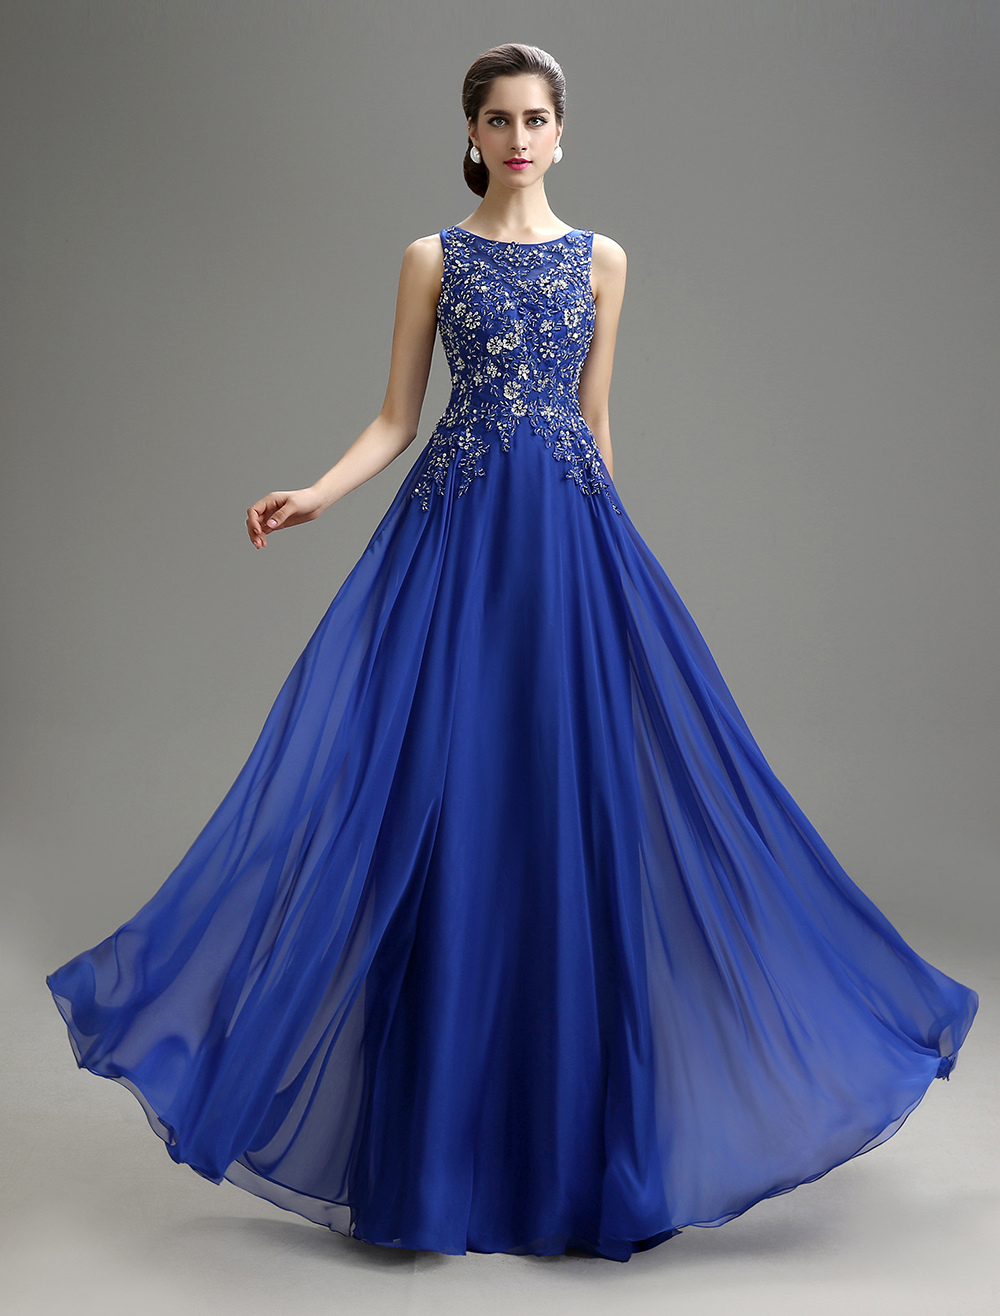 Royal Blue Applique Beaded Chiffon Dress For Mother of the Bride (Wedding) photo